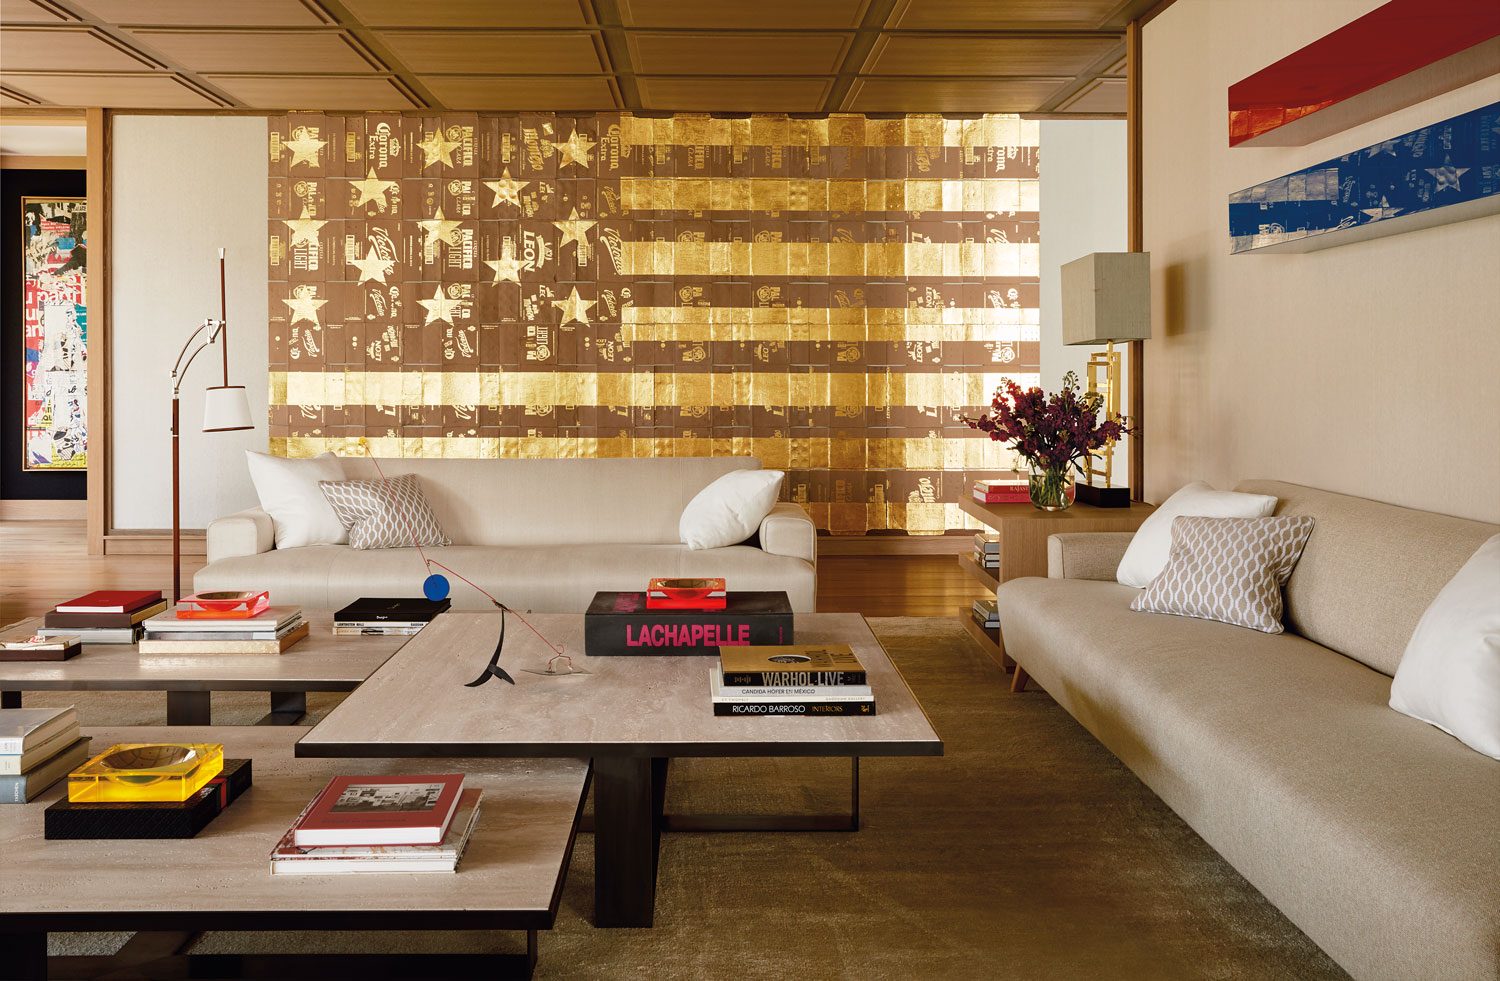 An overscale Danh Vo American flag painting and a two-part wall piece by John McCracken feature in the living area of collector Eugenio López’s home. The tabletop sculpture is by Alexander Calder.